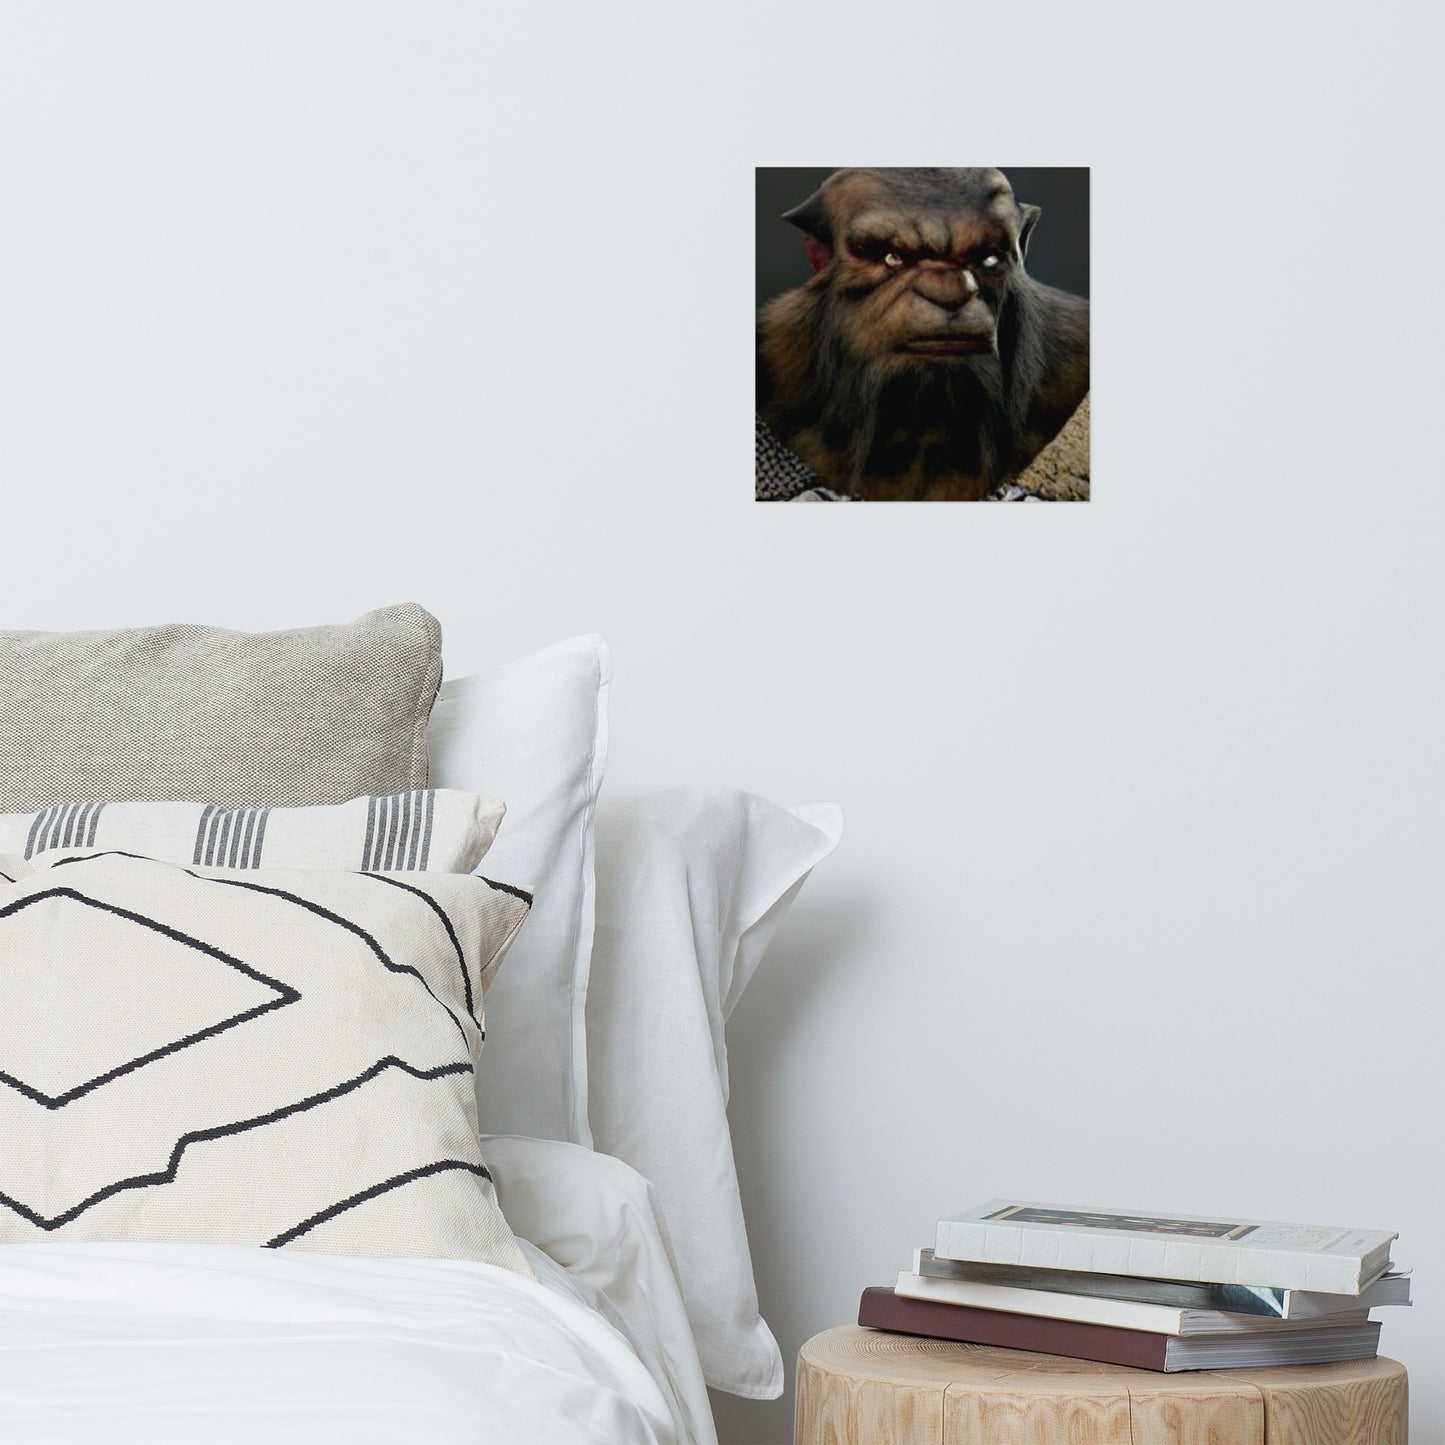 BUGBEAR POSTER